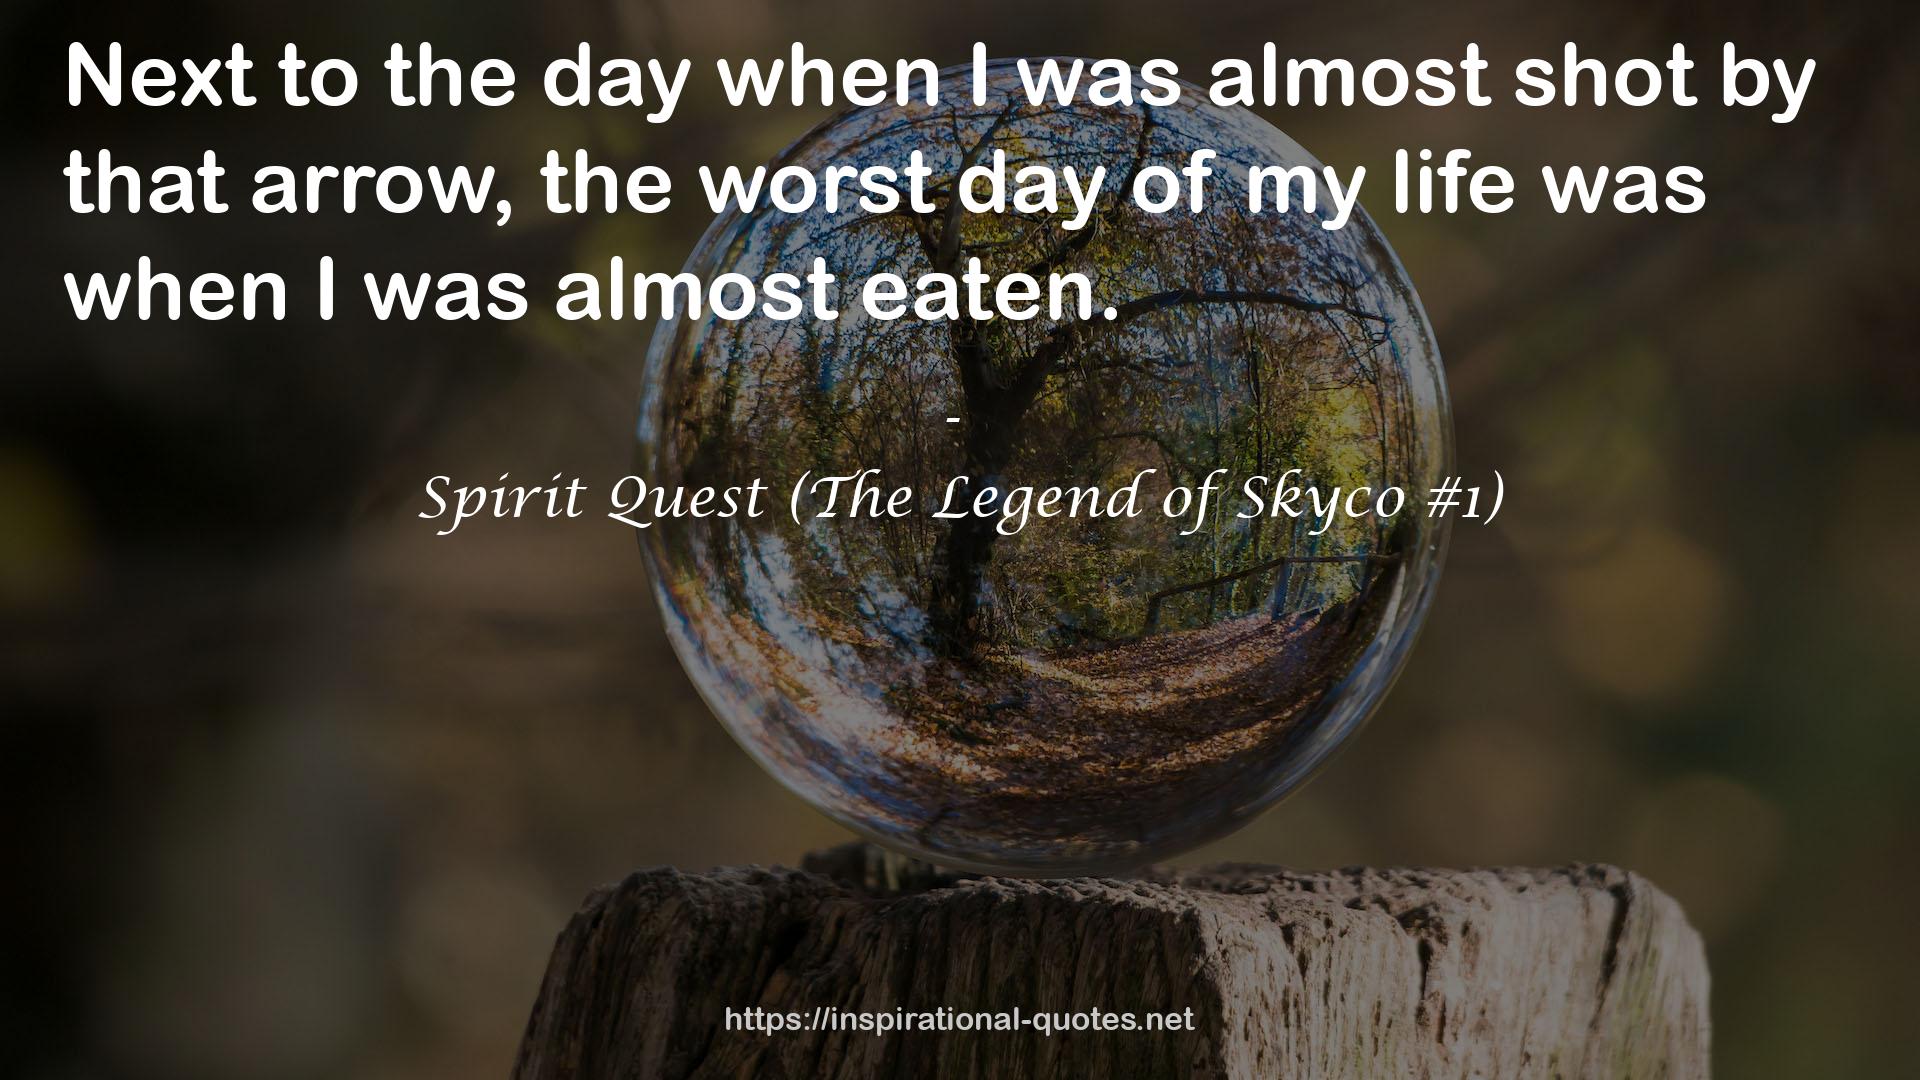 Spirit Quest (The Legend of Skyco #1) QUOTES